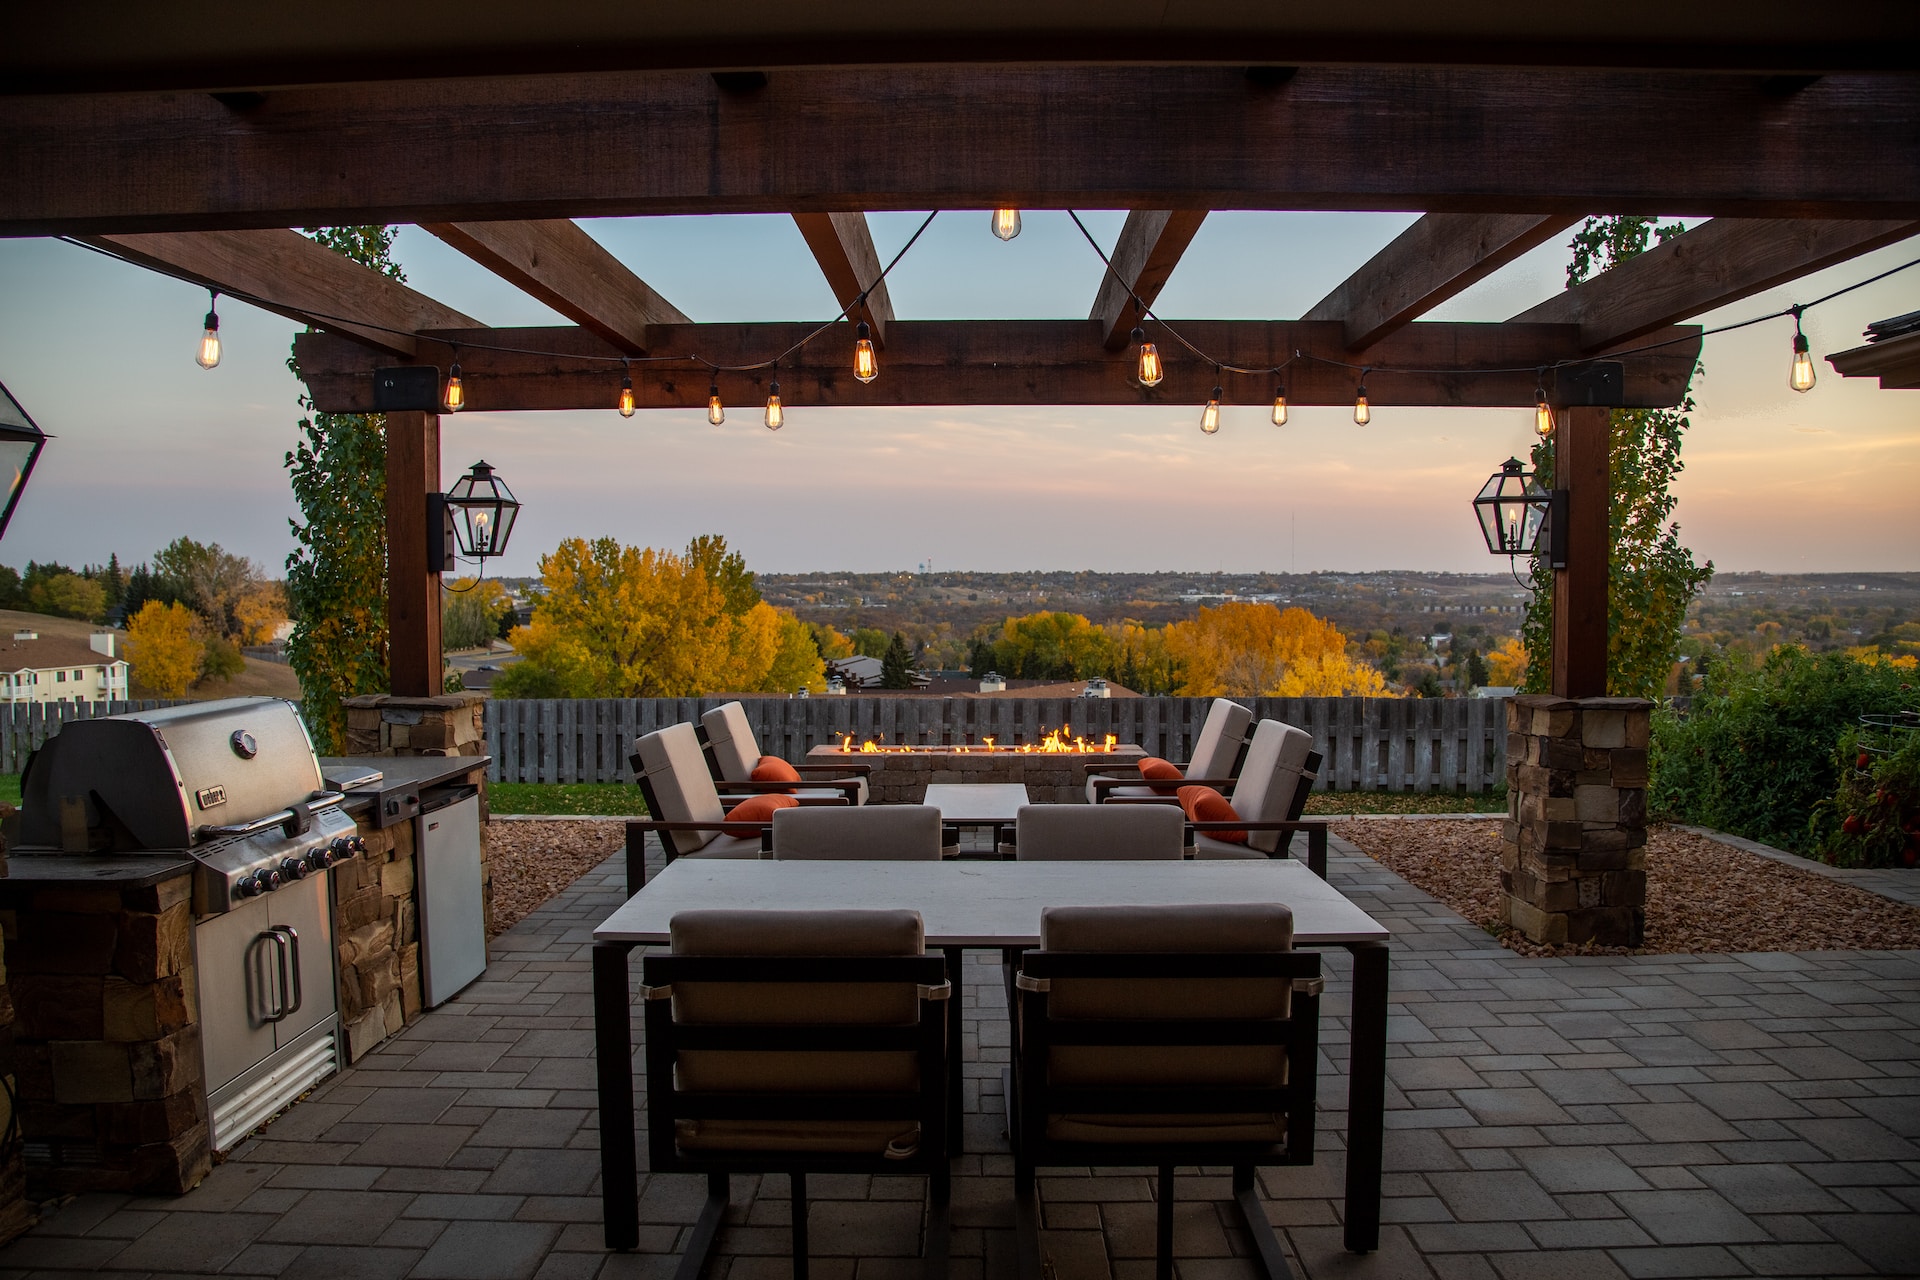 Photo of a patio with an outdoor kitchen